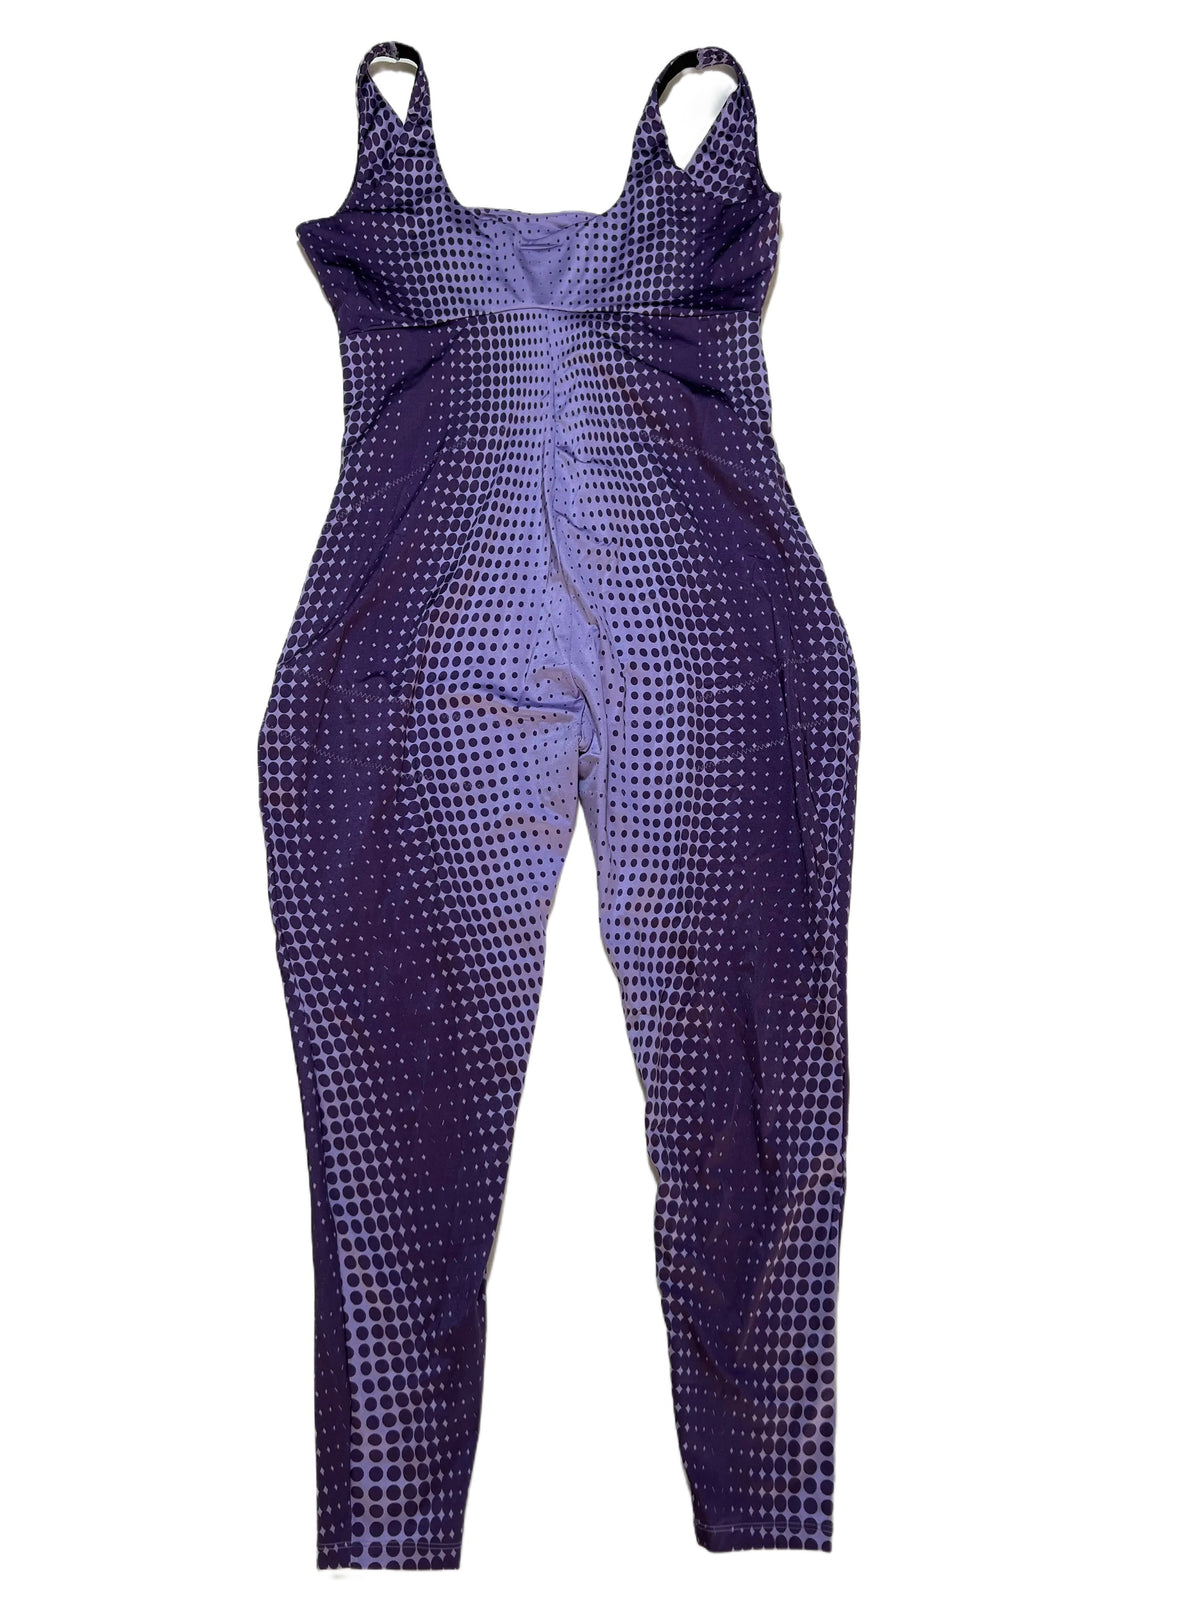 Yitty- Purple Jumpsuit NEW WITH TAGS